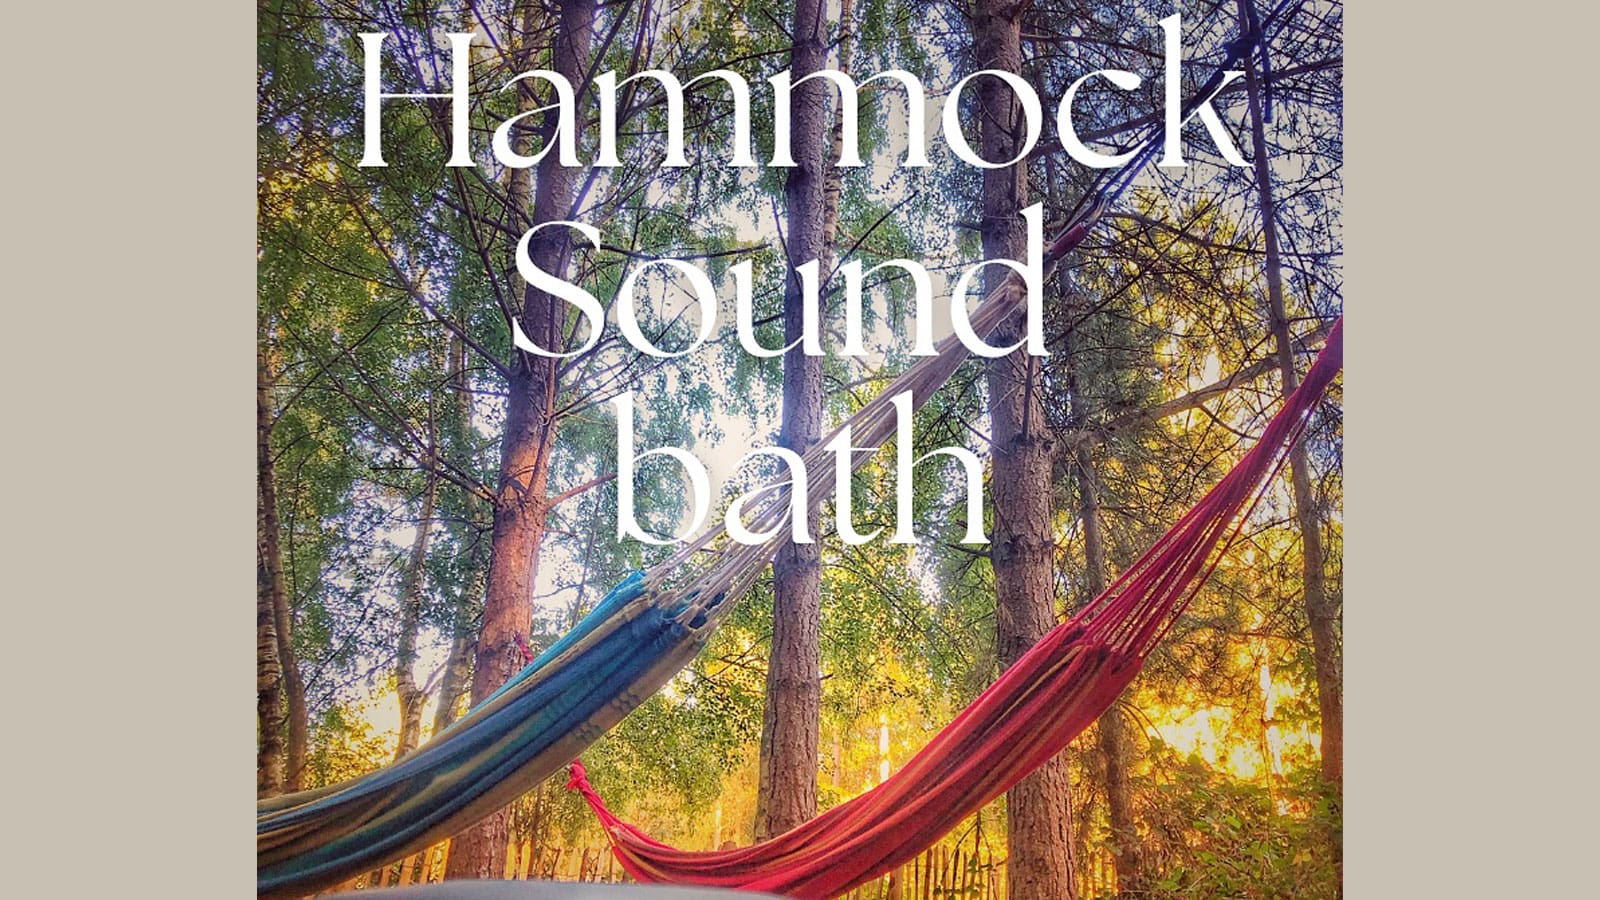 Thetford Bubbly Hub what's on and events Sound and Ground Hammock Sound Bath Thetford Forest